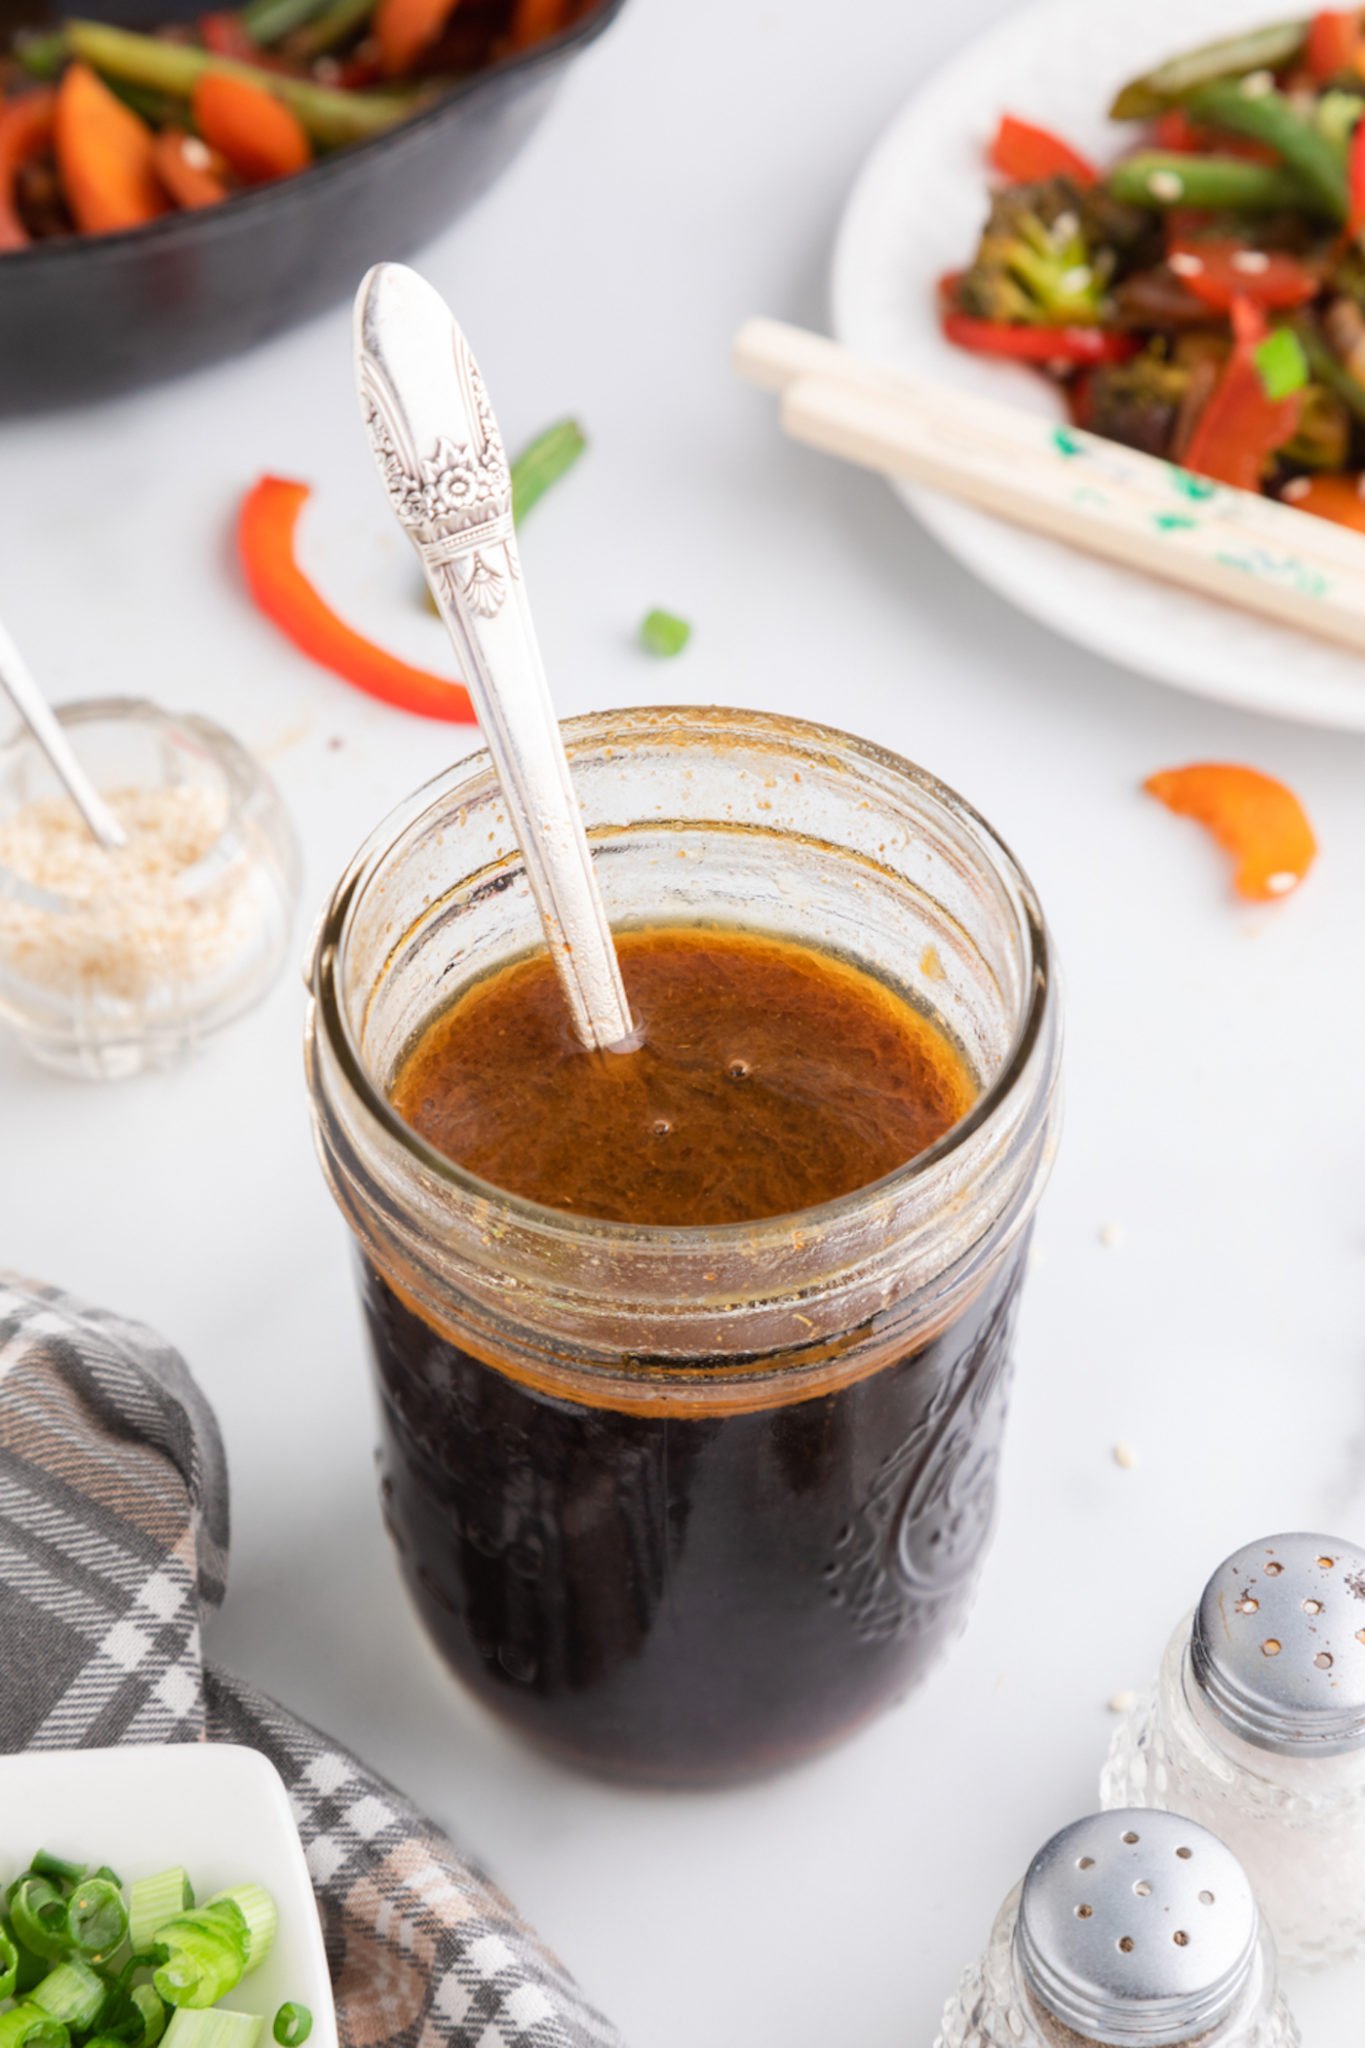 A silver spoon in a jar of freshly made stir fry sauce.